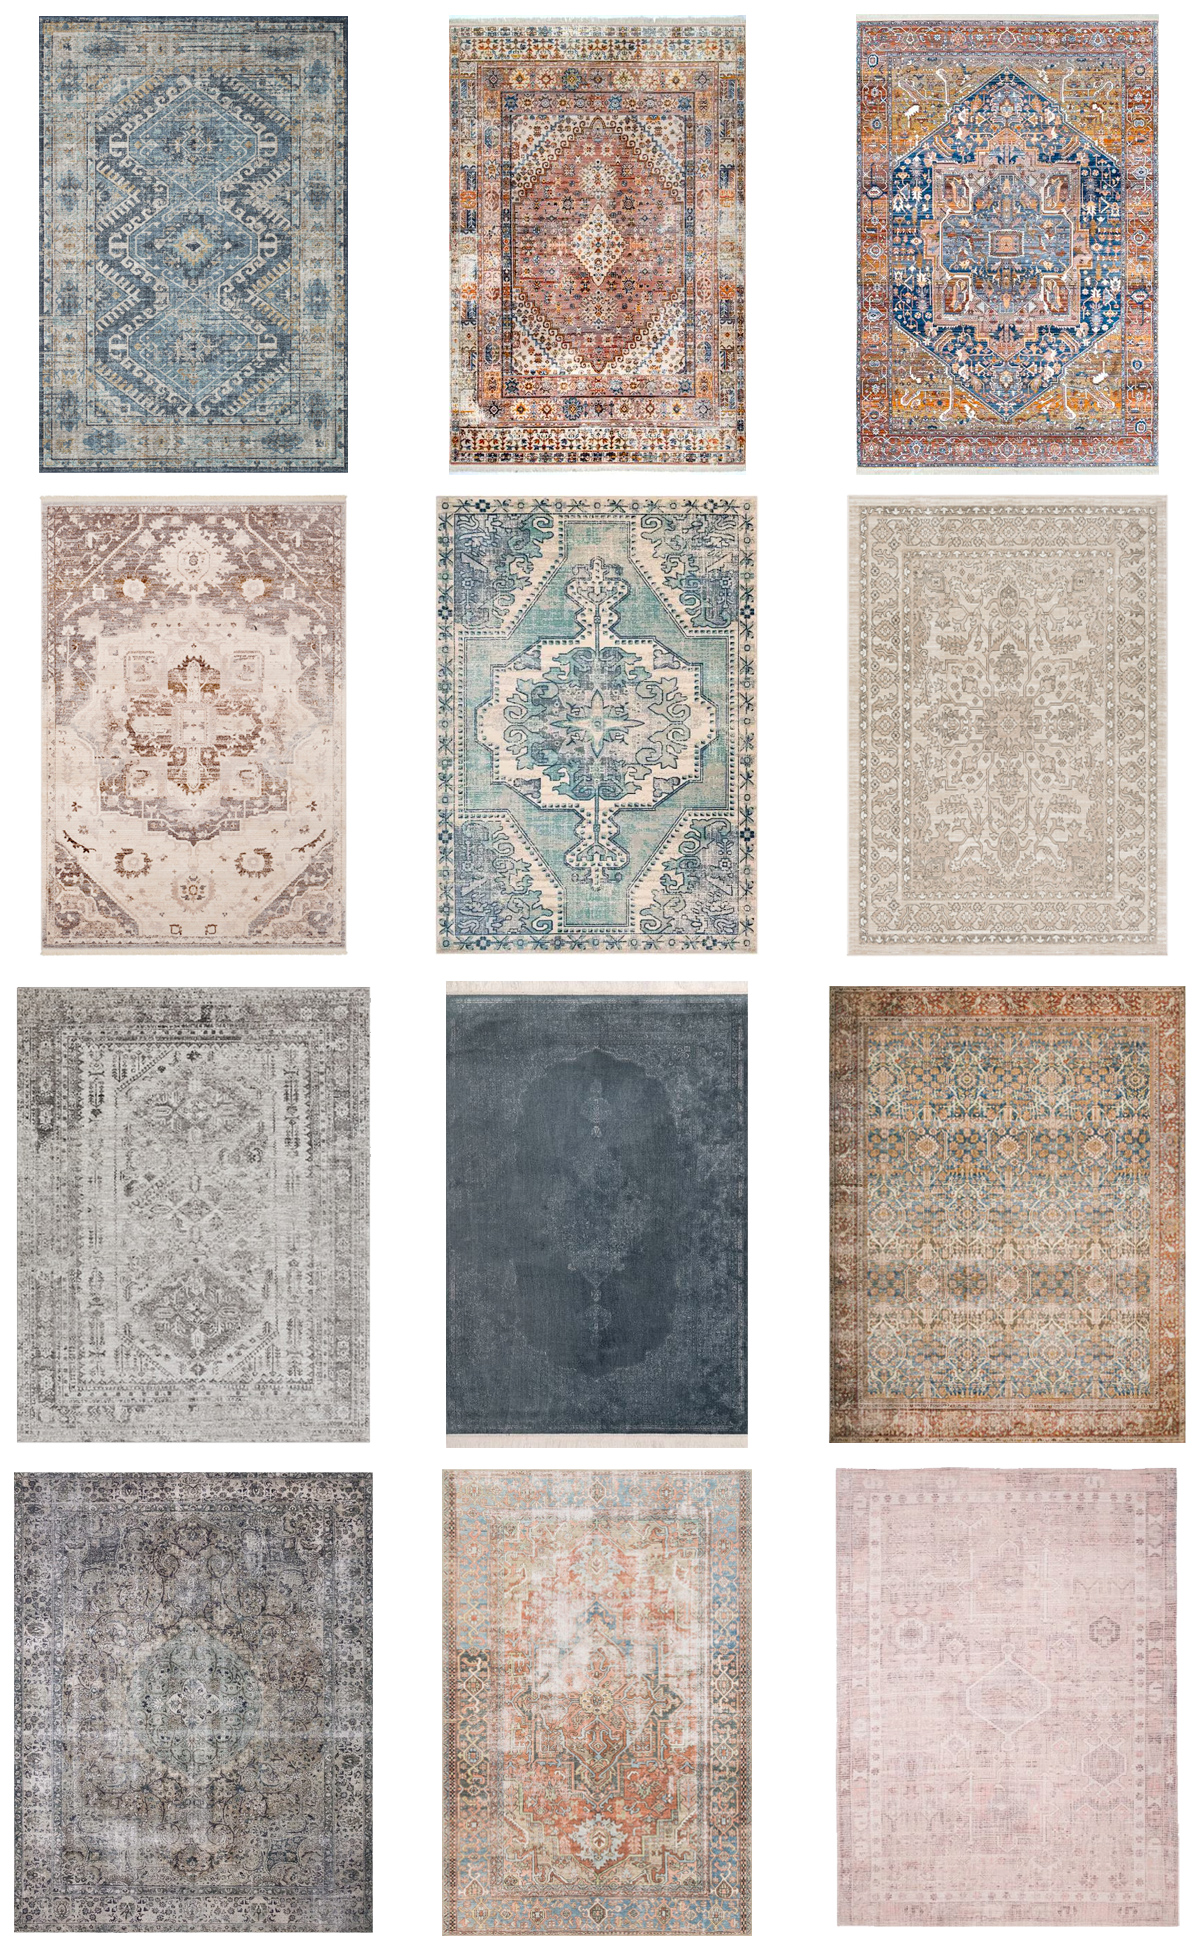 Affordable Vintage Style Rugs, Affordable Vintage Persian Rugs